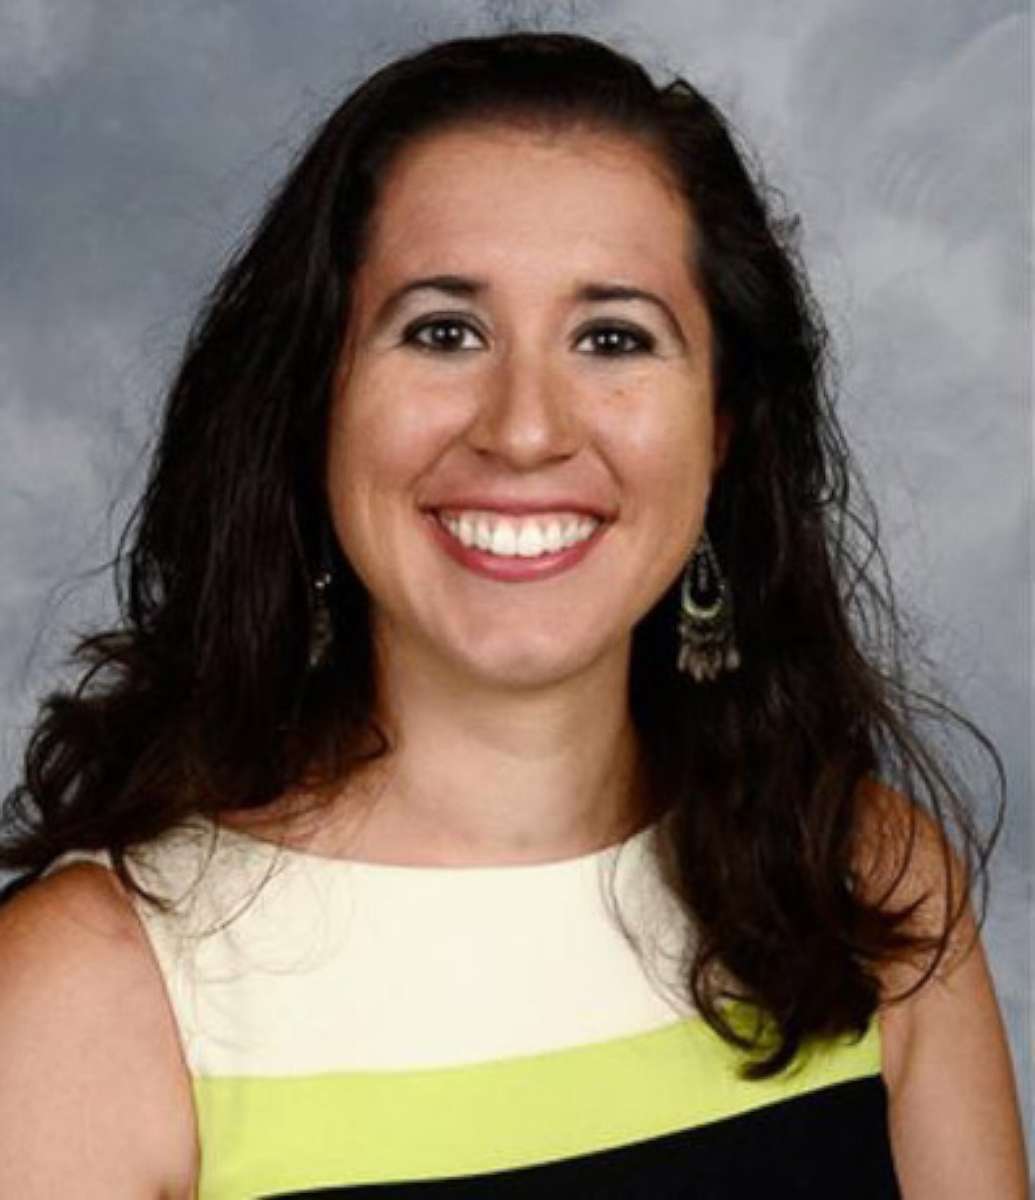 PHOTO: Dayanna Volitich in a photo from Crystal River Middle School where she worked as social studies teacher.  